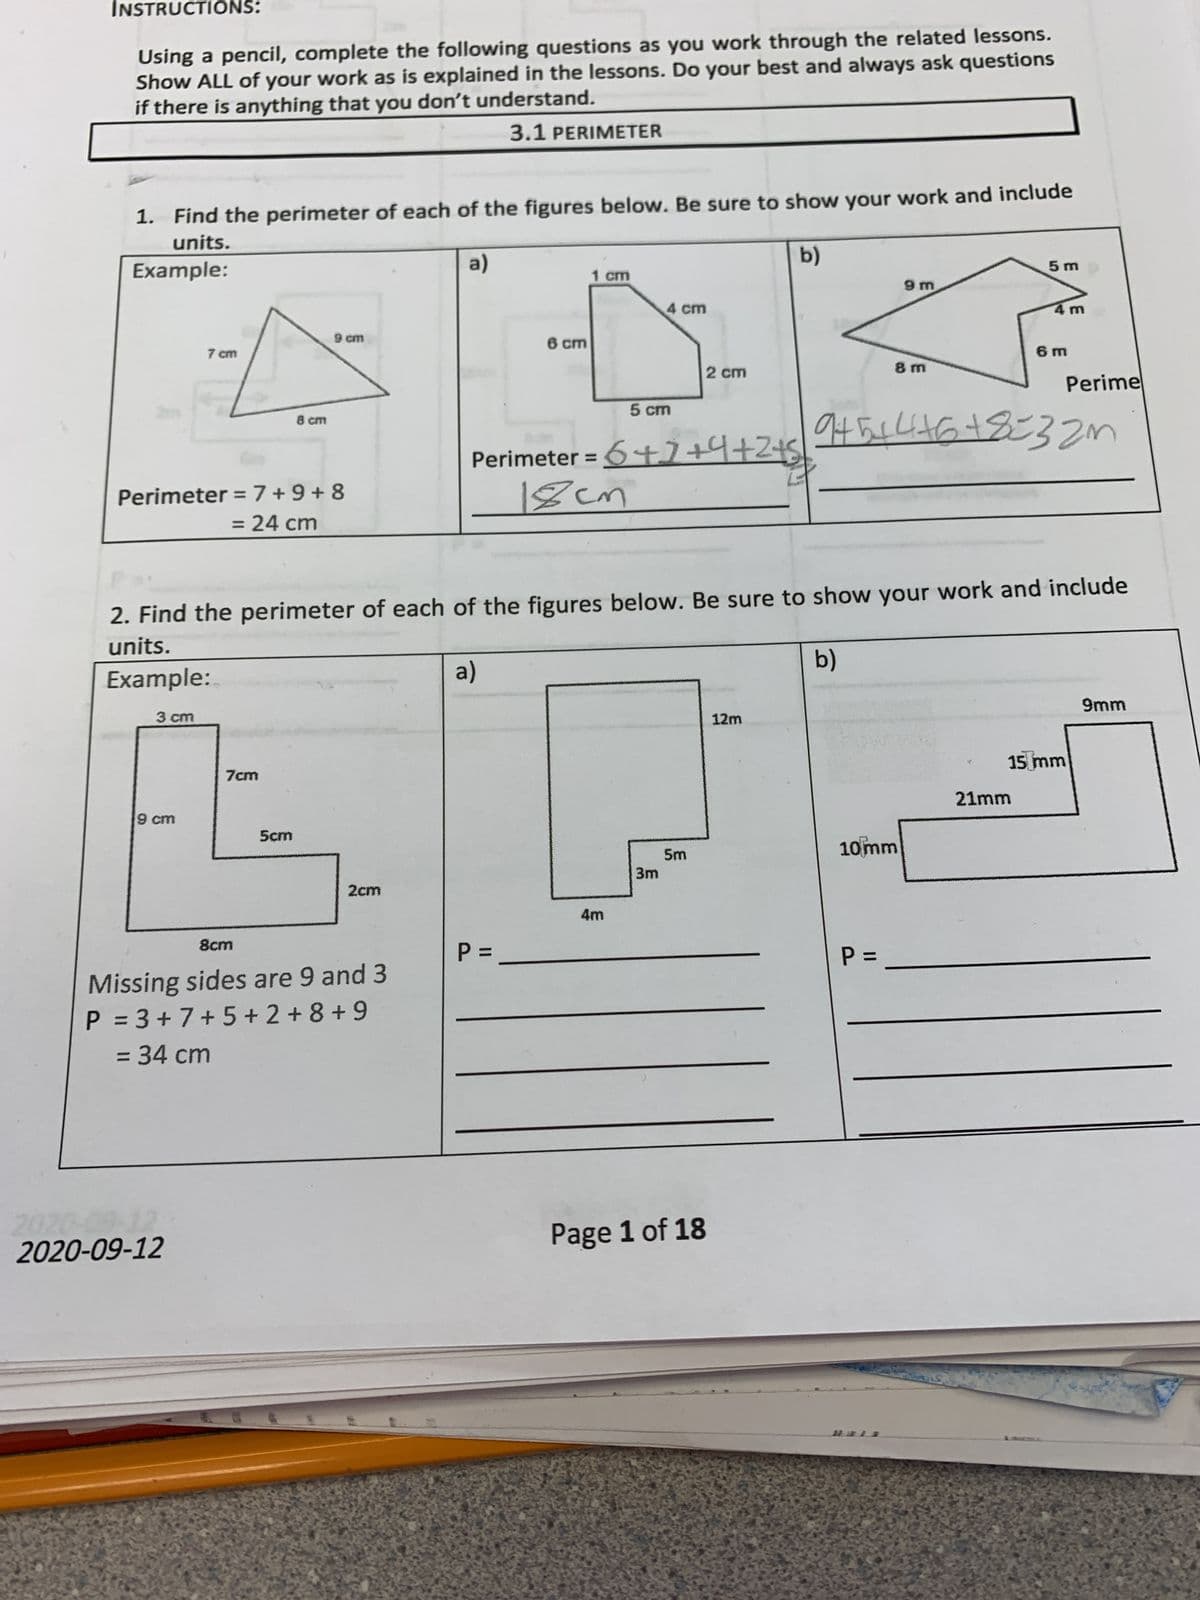 INSTRUCTIONS:
Using a pencil, complete the following questions as you work through the related lessons.
Show ALL of your work as is explained in the lessons. Do your best and always ask questions
if there is anything that you don't understand.
3.1 PERIMETER
1. Find the perimeter of each of the figures below. Be sure to show your work and include
units.
a)
b)
Example:
1 cm
5 m
9 m
4 cm
4m
9 cm
6 cm
7 cm
6 m
2 cm
8 m
Perime
5 cm
8 cm
Perimeter = 6t7+4+245
18cm
%3D
Perimeter =7+9+ 8
= 24 cm
2. Find the perimeter of each of the figures below. Be sure to show your work and include
units.
b)
Example:
a)
9mm
3 cm
12m
15 mm
7cm
21mm
9 cm
Scm
5m
10mm
3m
2cm
4m
8cm
P =
Missing sides are 9 and 3
P = 3 +7+5 + 2 + 8 + 9
=D34 cm
Page 1 of 18
2020-09-12
